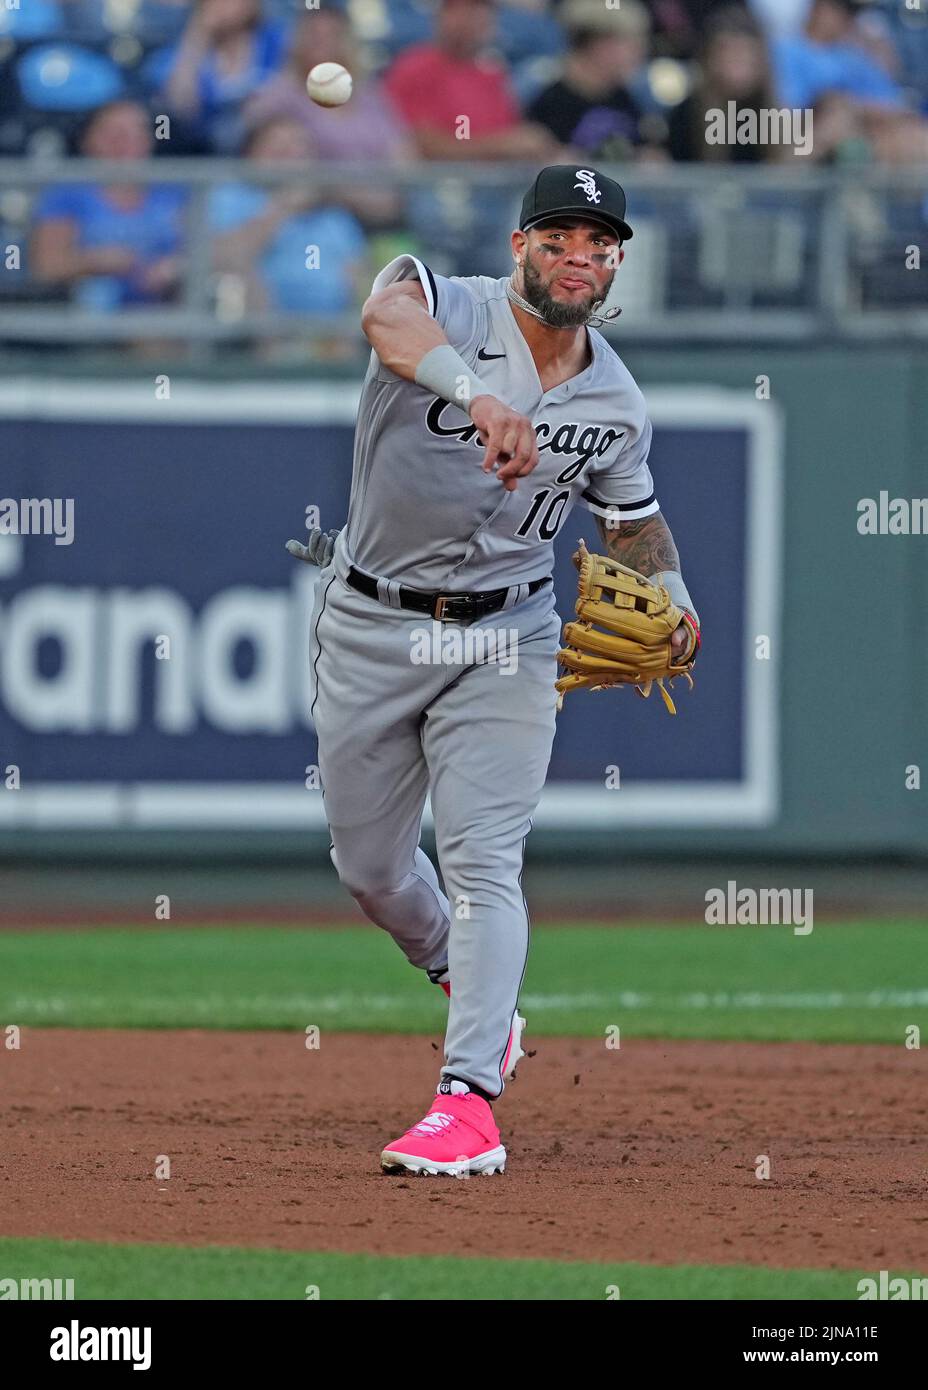 Chicago White Sox third baseman Yoan Moncada (10) swings at the pitch in an  MLB baseball game against the Colorado Rockies, Sunday, Aug. 20, 2023. The  White Sox defeated the Rockies 10-5